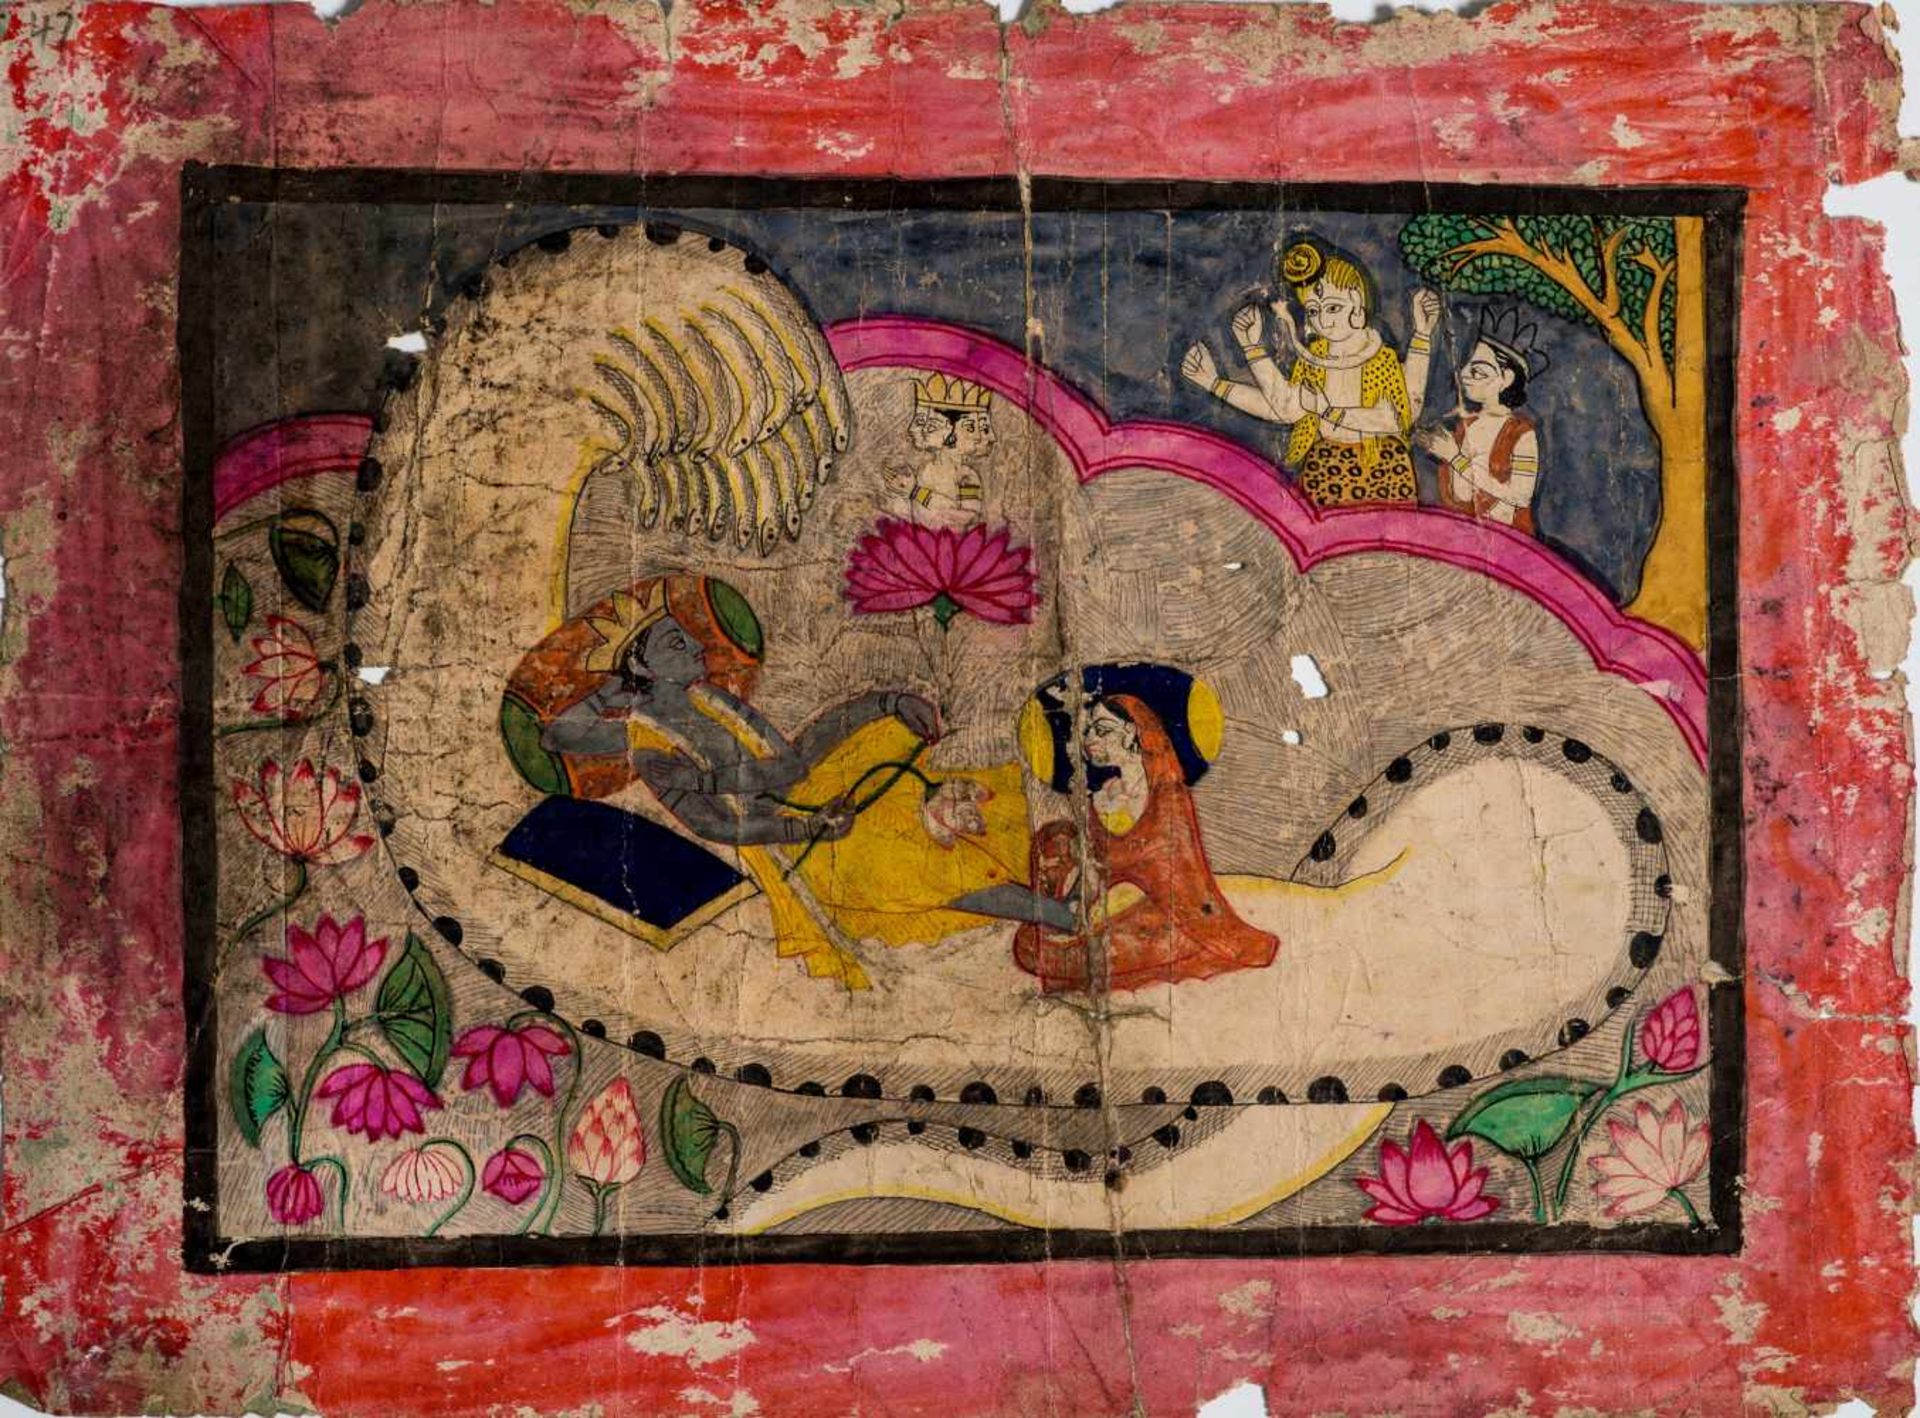 VISHNU ON THE WORLDSNAKE - INDIA, 19TH CENTURYMiniature painting with colors on paper India, 19th